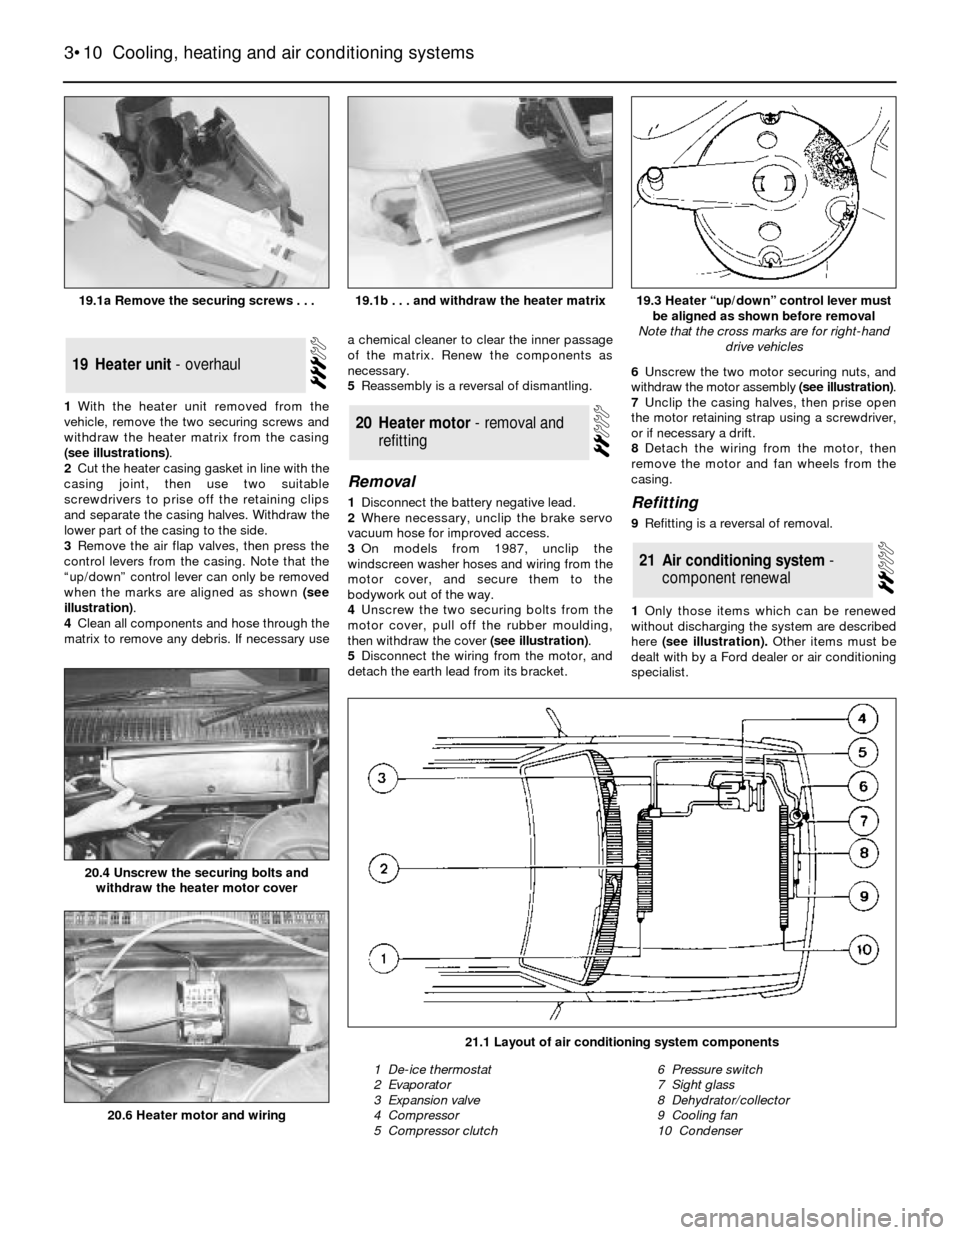 FORD SIERRA 1986 1.G Cooling And Air Conditioning Systems Workshop Manual 1With the heater unit removed from the
vehicle, remove the two securing screws and
withdraw the heater matrix from the casing
(see illustrations).
2Cut the heater casing gasket in line with the
casing